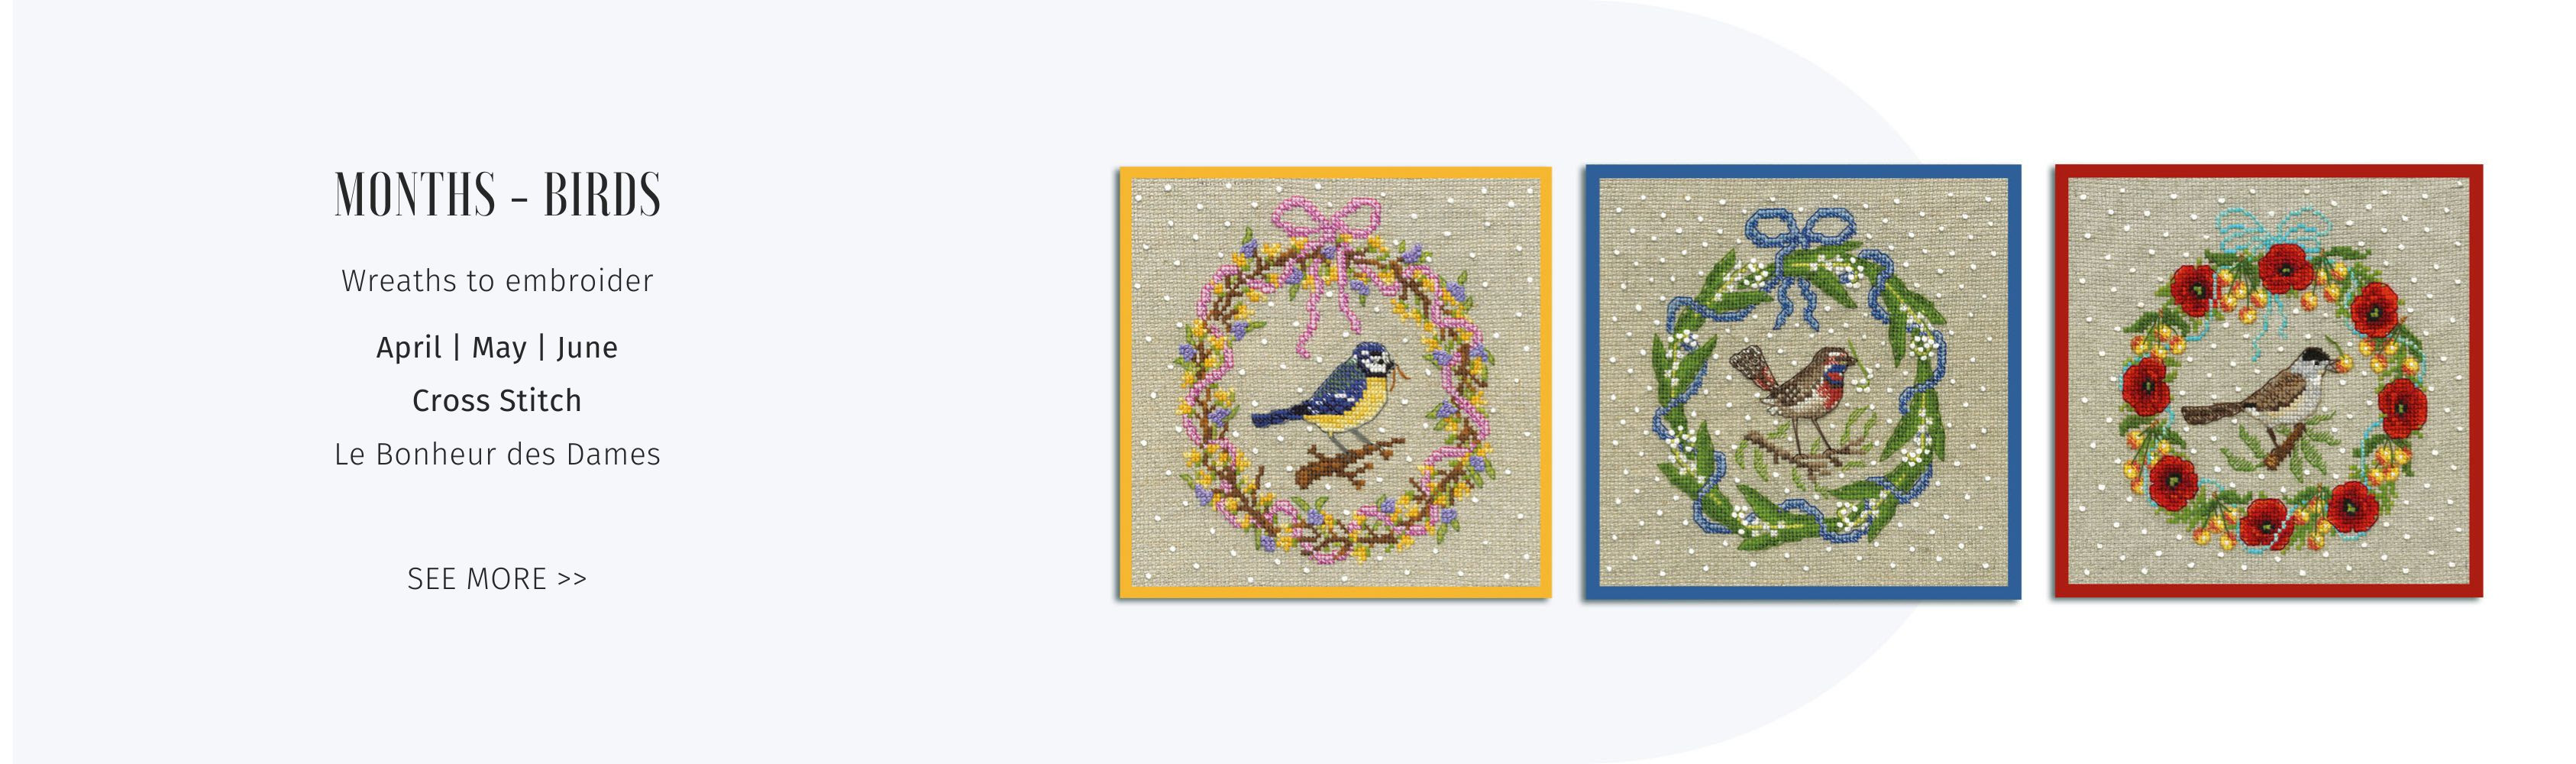 Months - Birds. Wreaths to embroider - April, May, June. Counted cross stitch. Le Bonheur des Dames